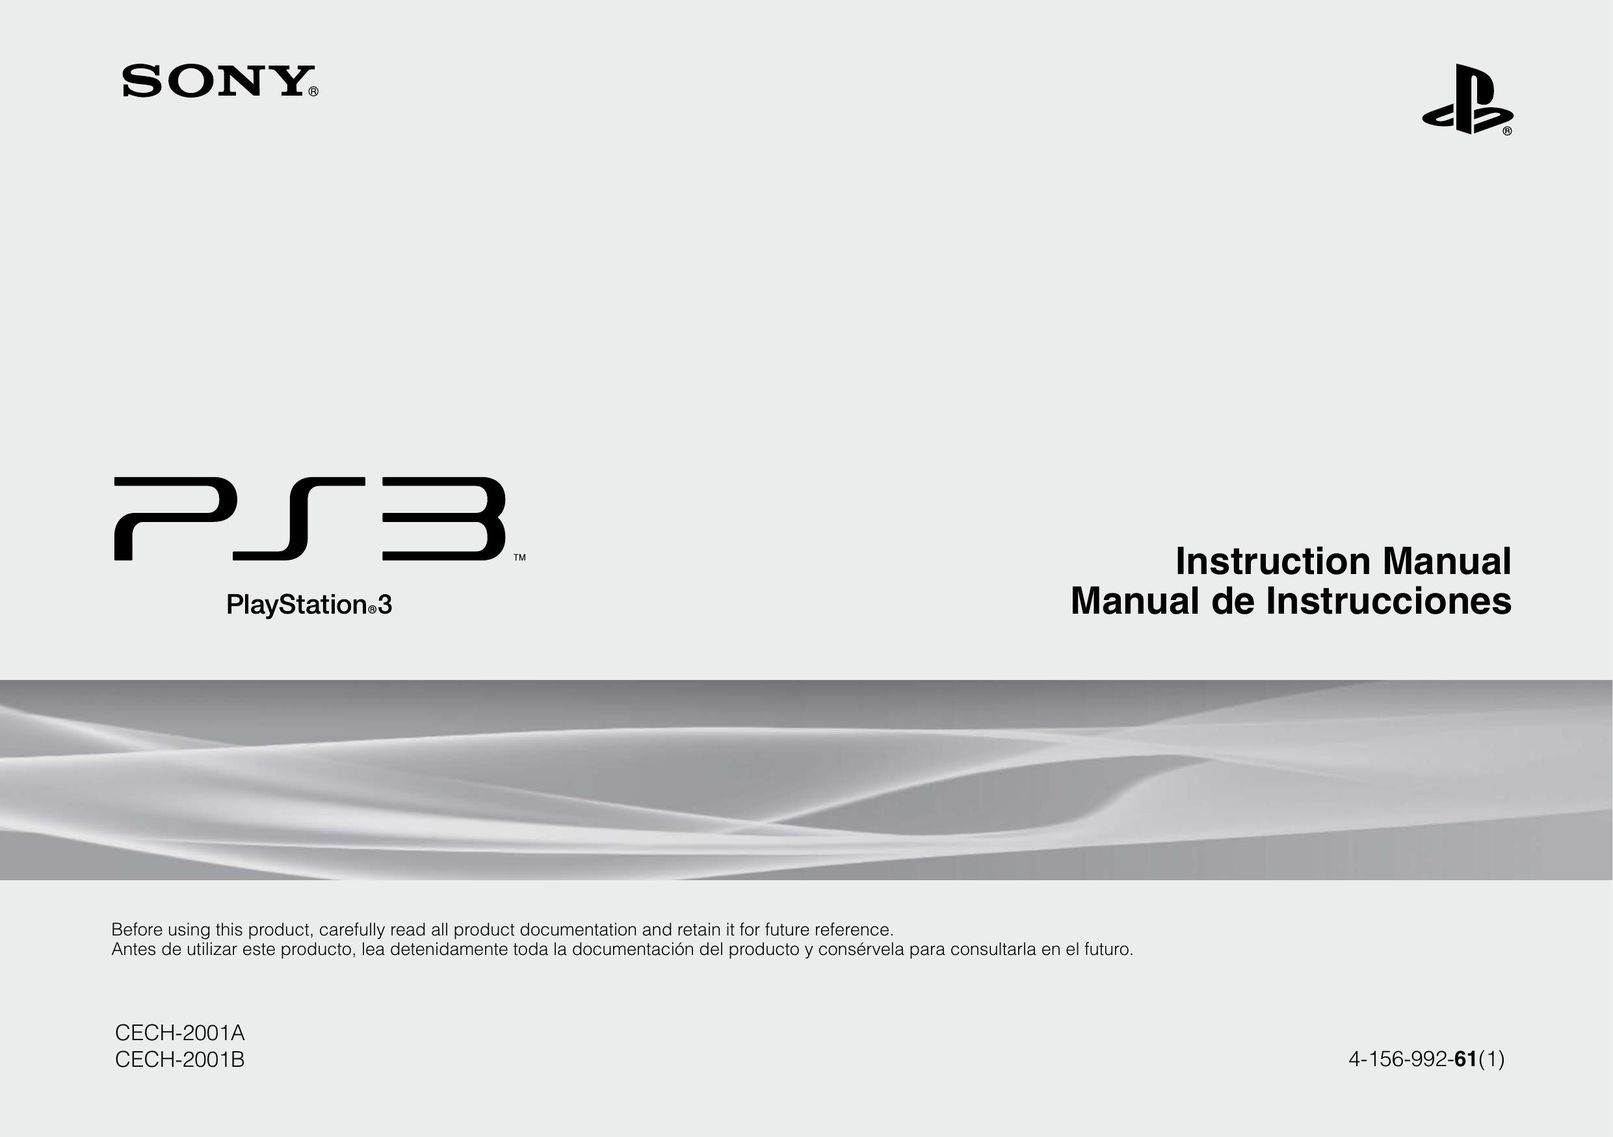 Sony CECH-2001B Video Game Console User Manual